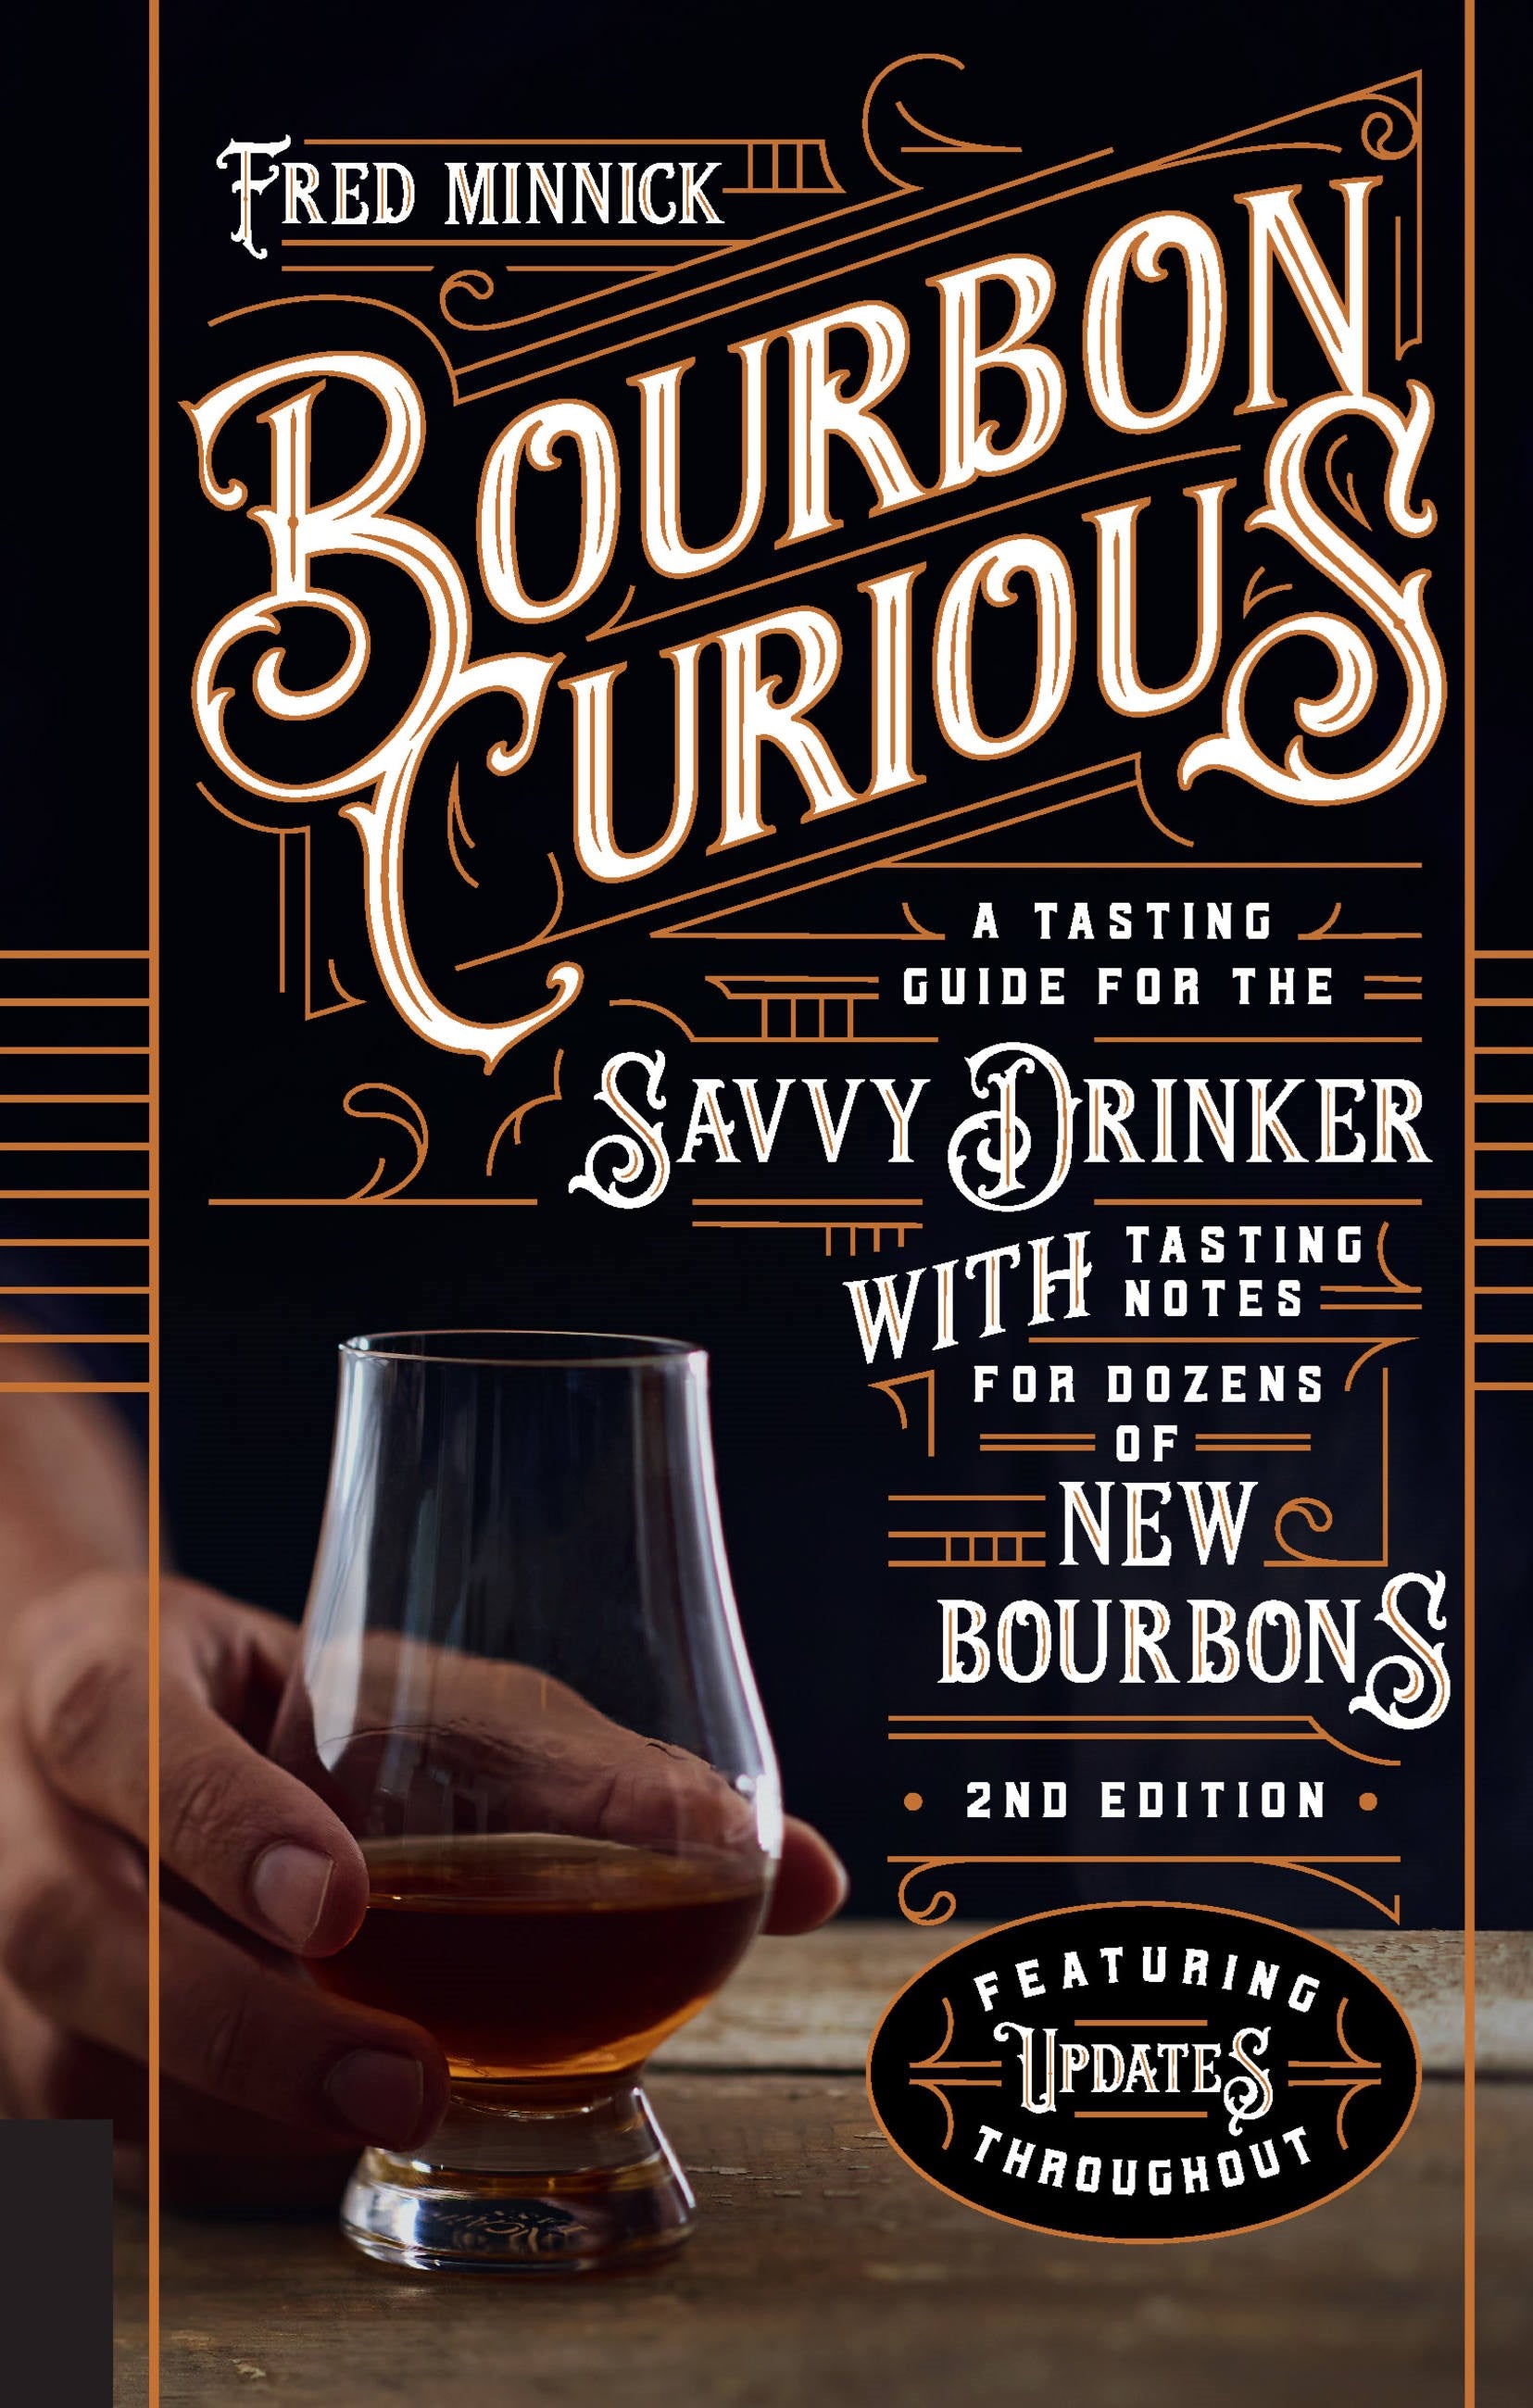 Bourbon Curious: A Tasting Guide for the Savvy Drinker with Tasting Notes for Dozens of New Bourbons (New edition)